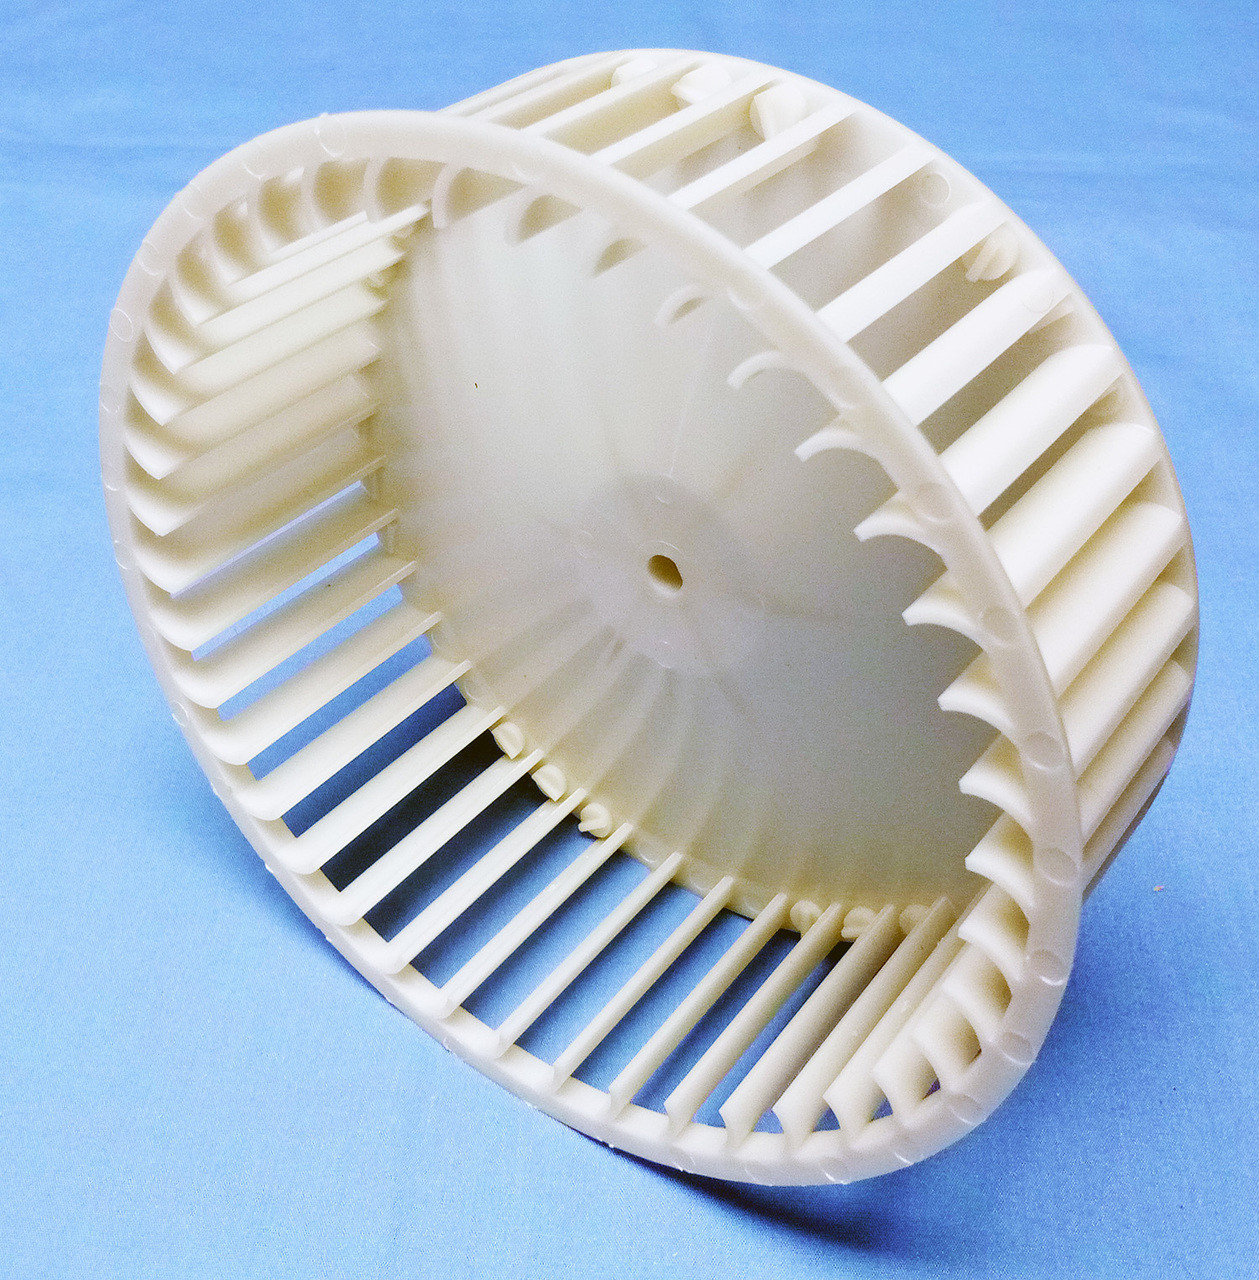 NUTOPARTS SNT5901A000 BLOWER WHEEL FOR 8832 8833 QT80 QT110 8662 8663 8664 FLYWHEEL  SQUIRREL CAGE